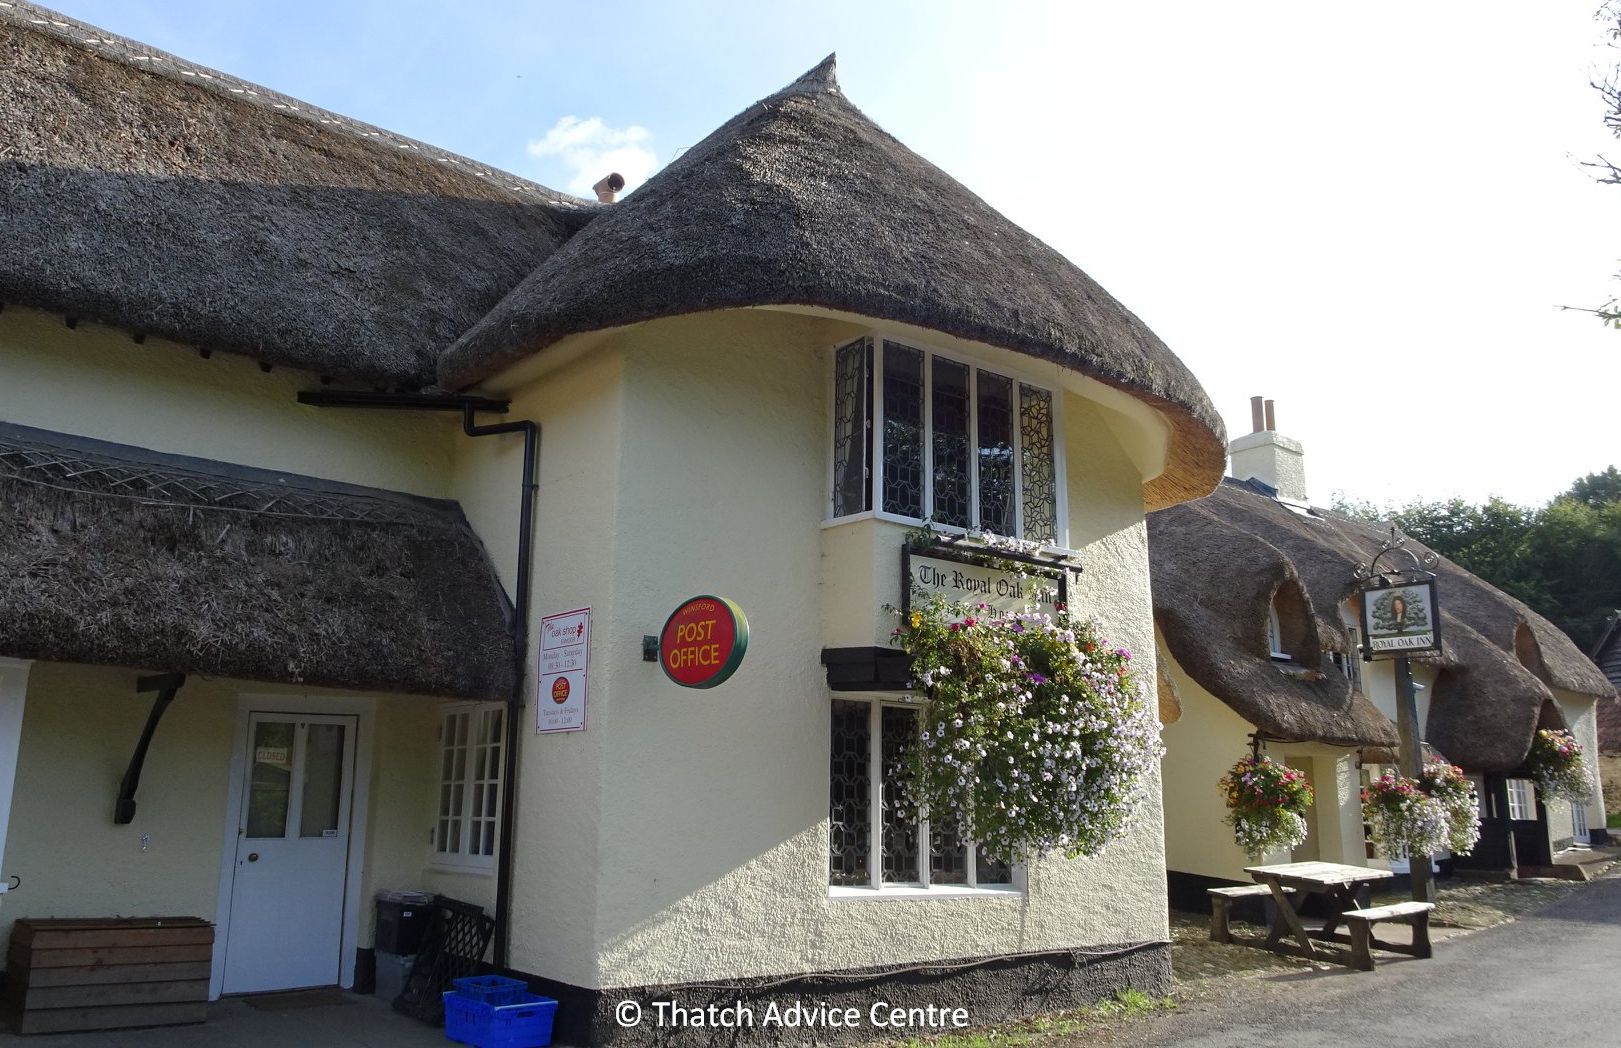 Thatch Advice Centre Thatched Business Picture Competiton - IOW